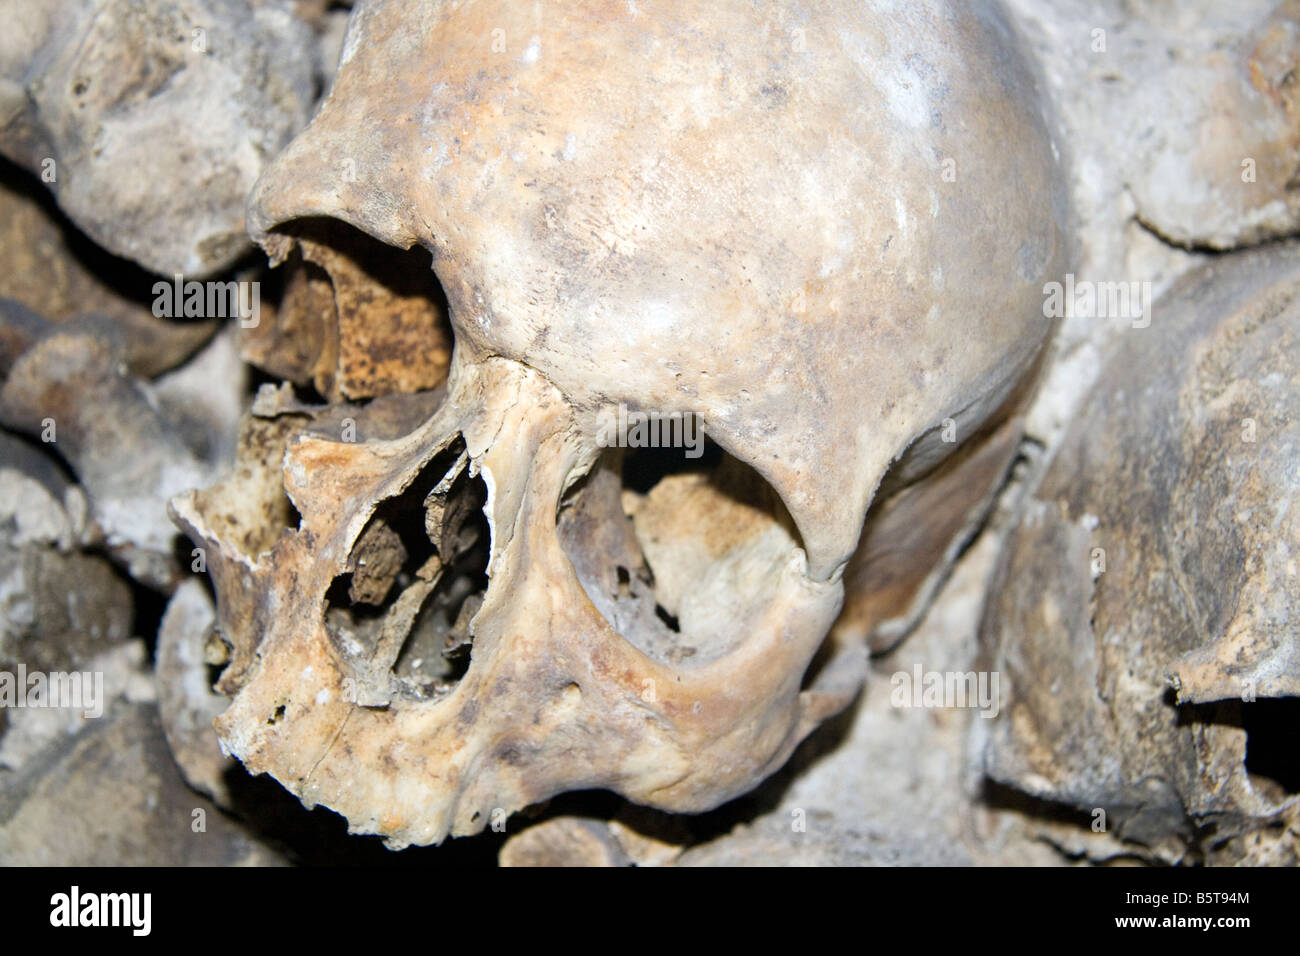 One of the many skulls and bones in the catacombs, paris, france Stock Photo